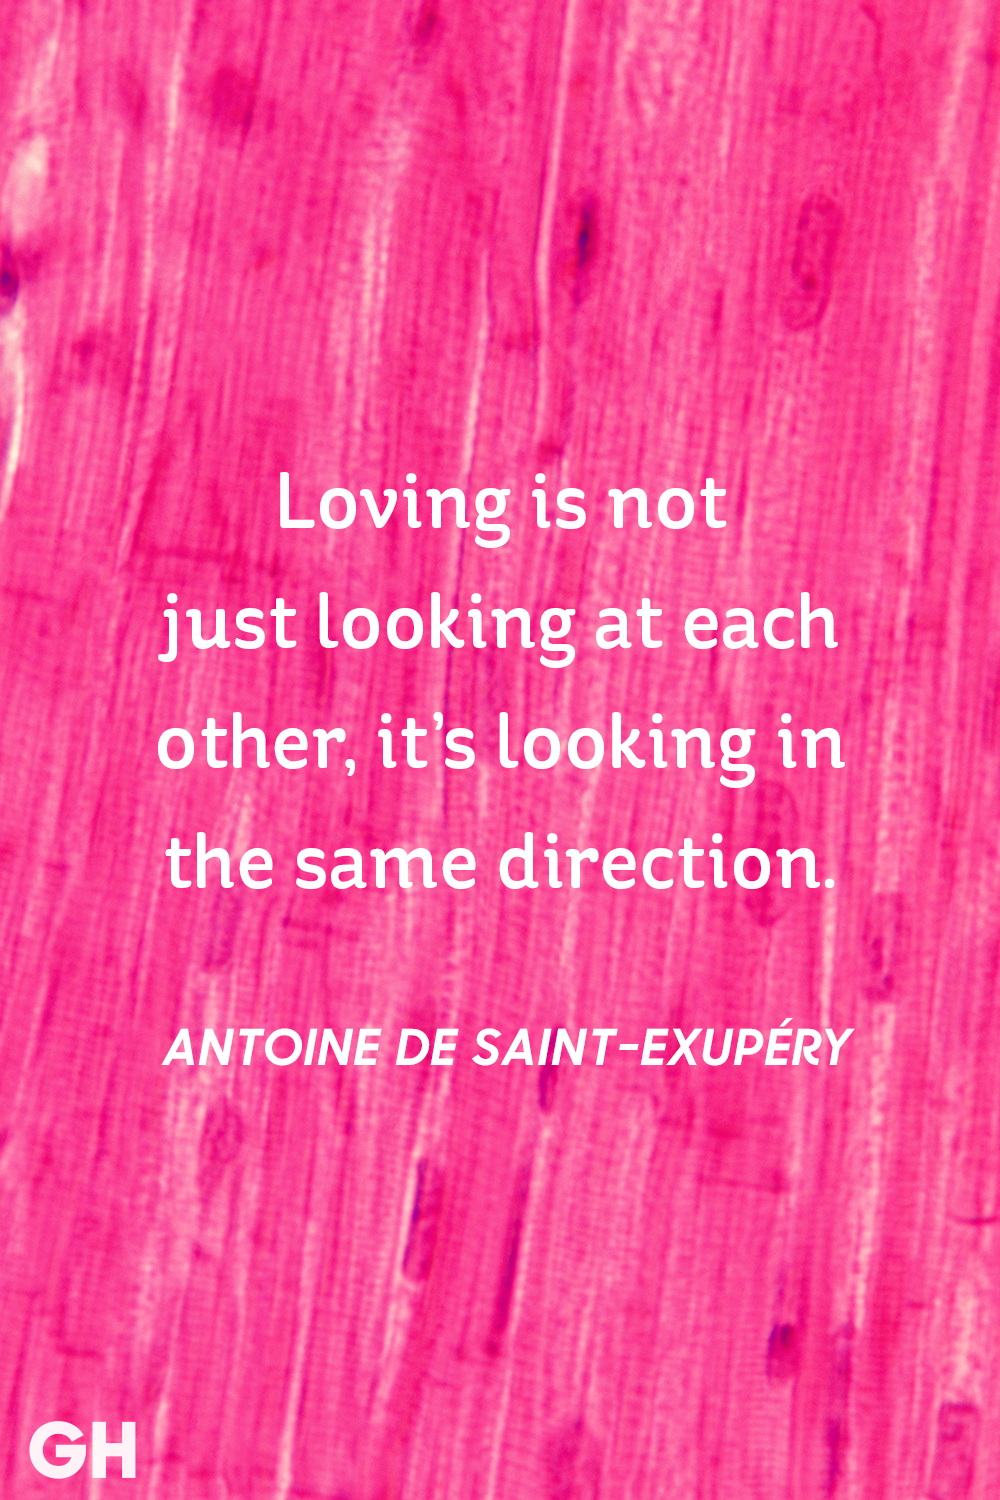 loving is not just looking at each other, it’s looking in the same direction. Antoine de saint-exupery